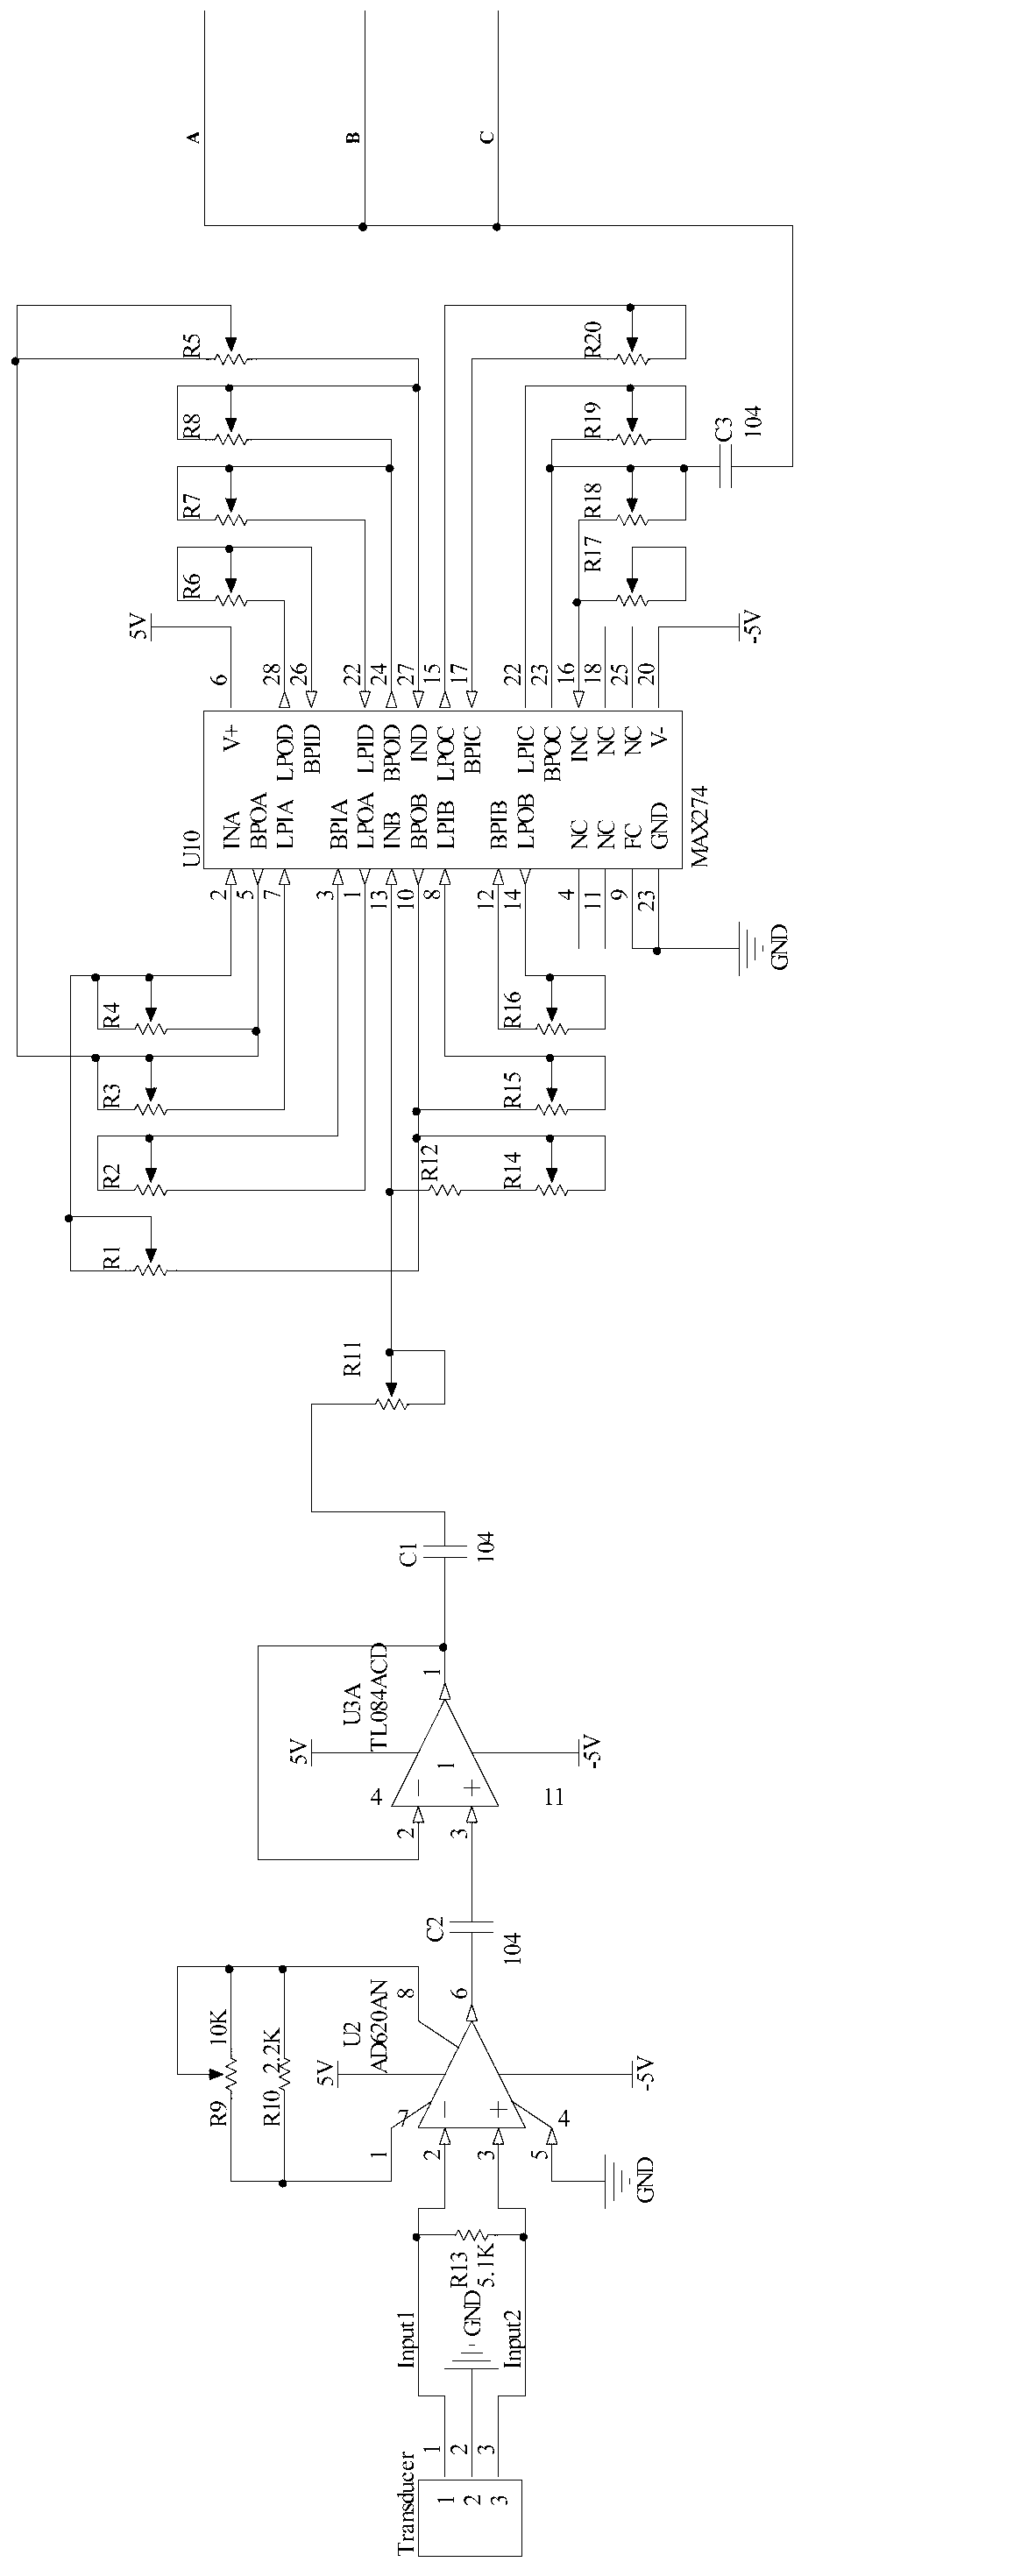 Frame synchronization device capable of suppressing and measuring Doppler in underwater acoustic communication